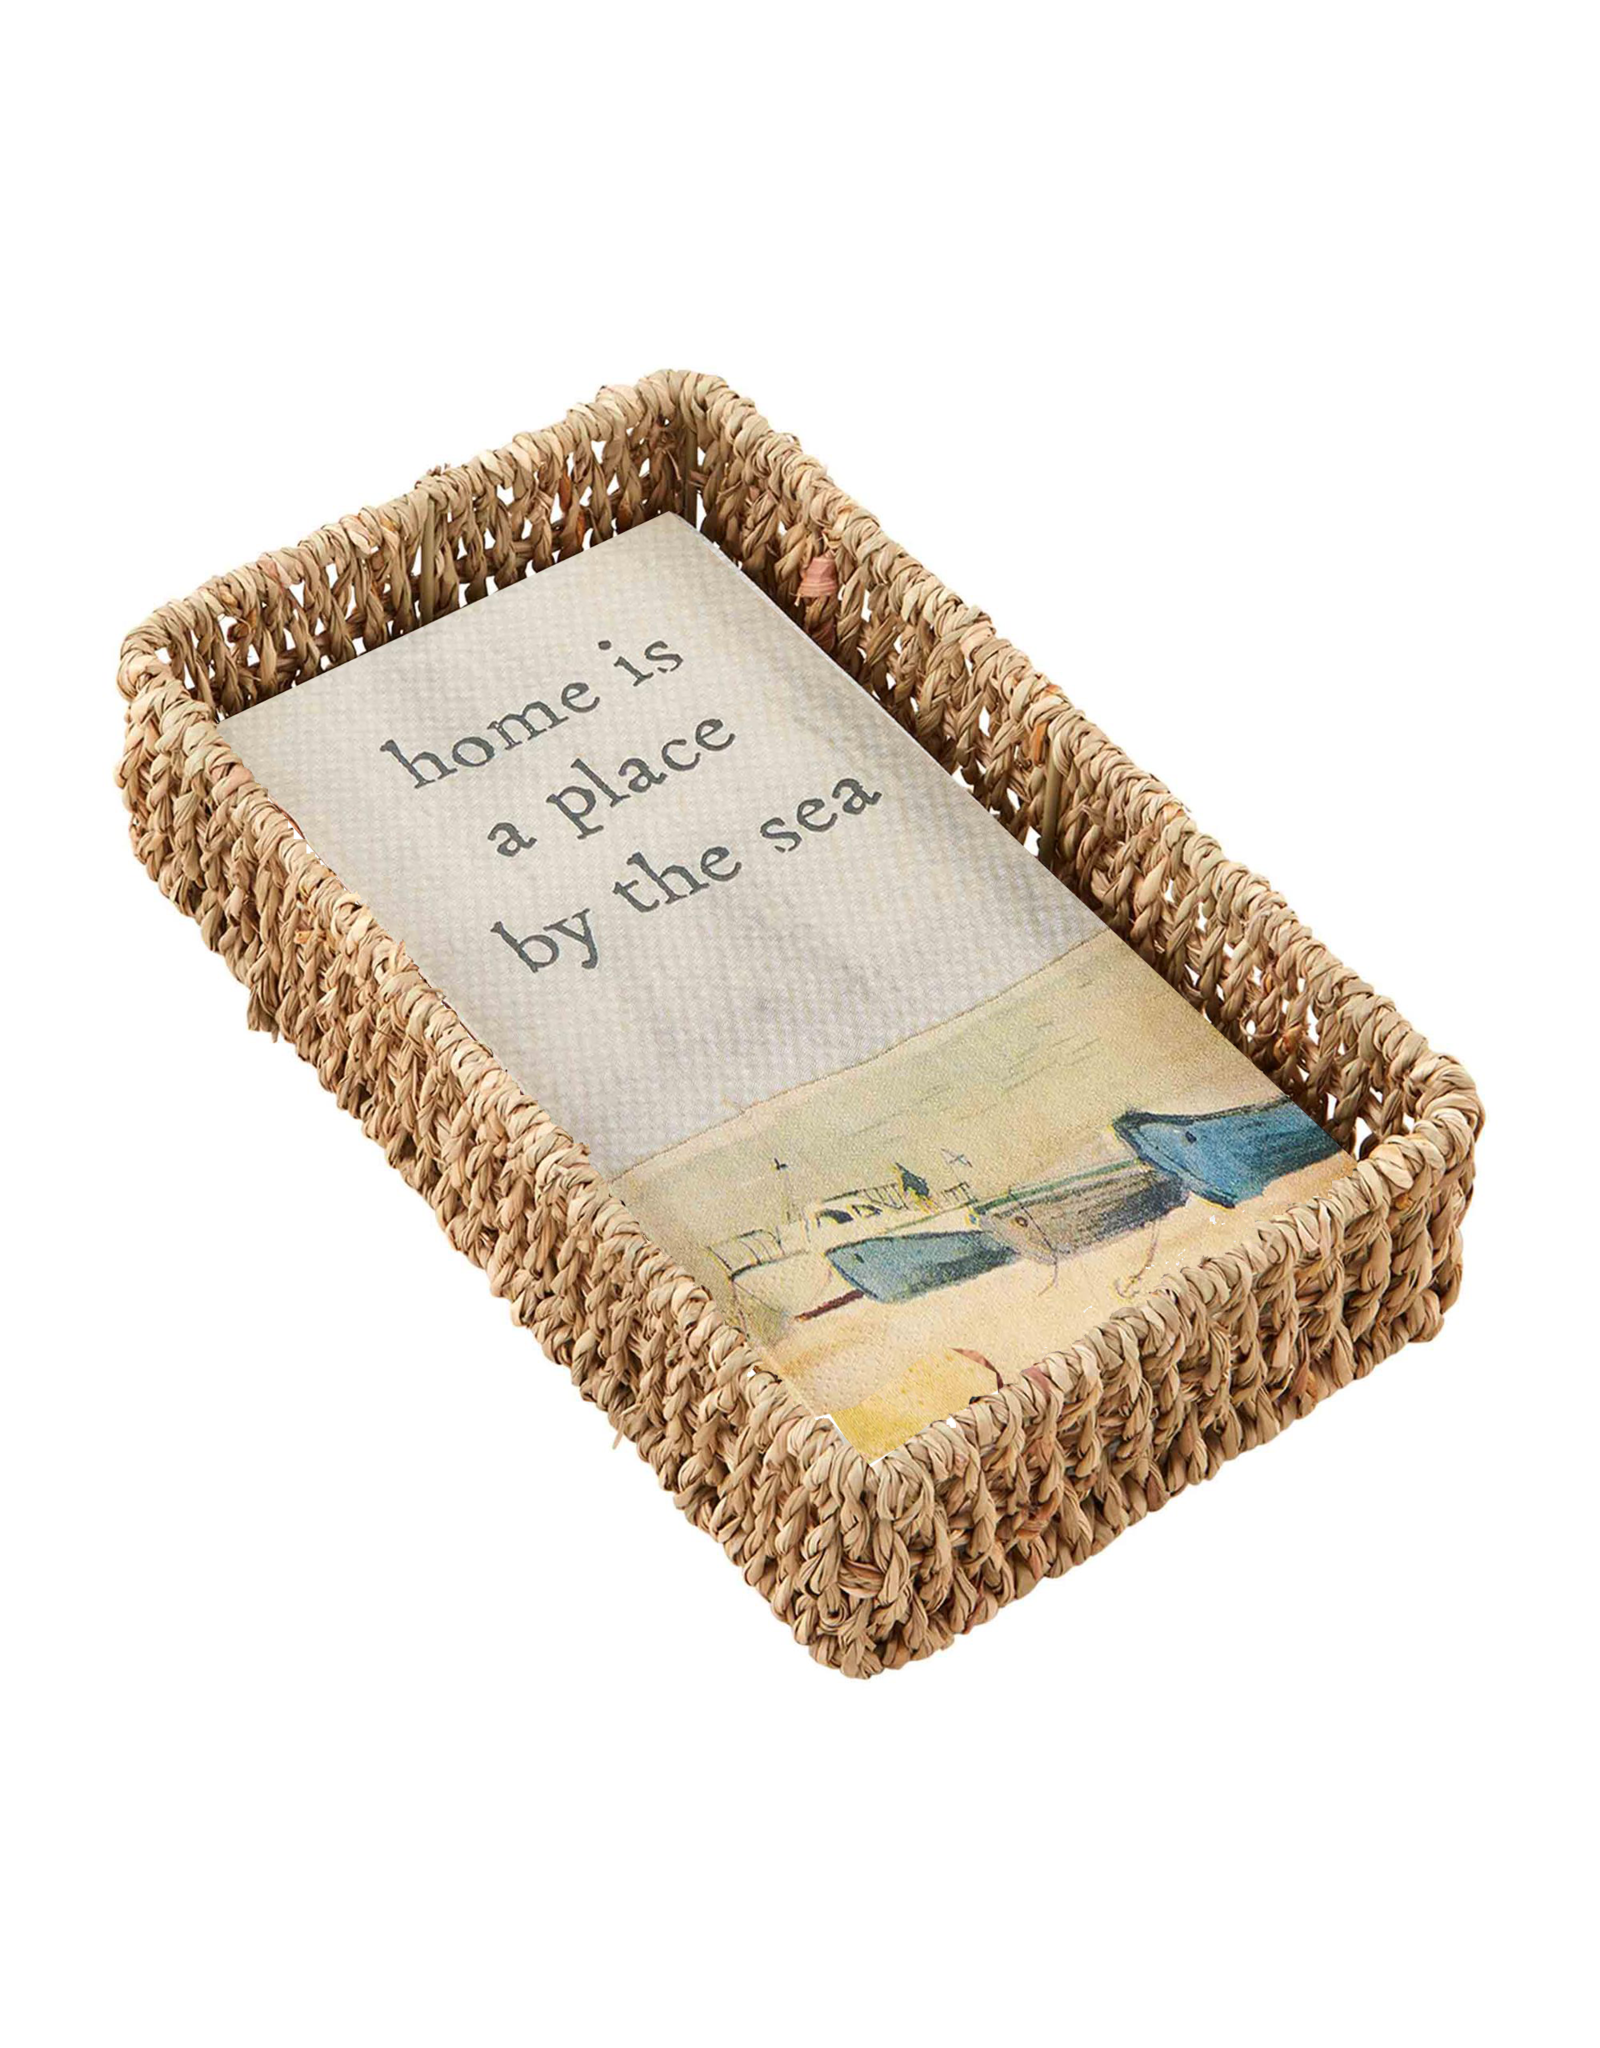 Mud Pie Guest Towel Napkin In Basket Set | Home Is A Place By The Sea